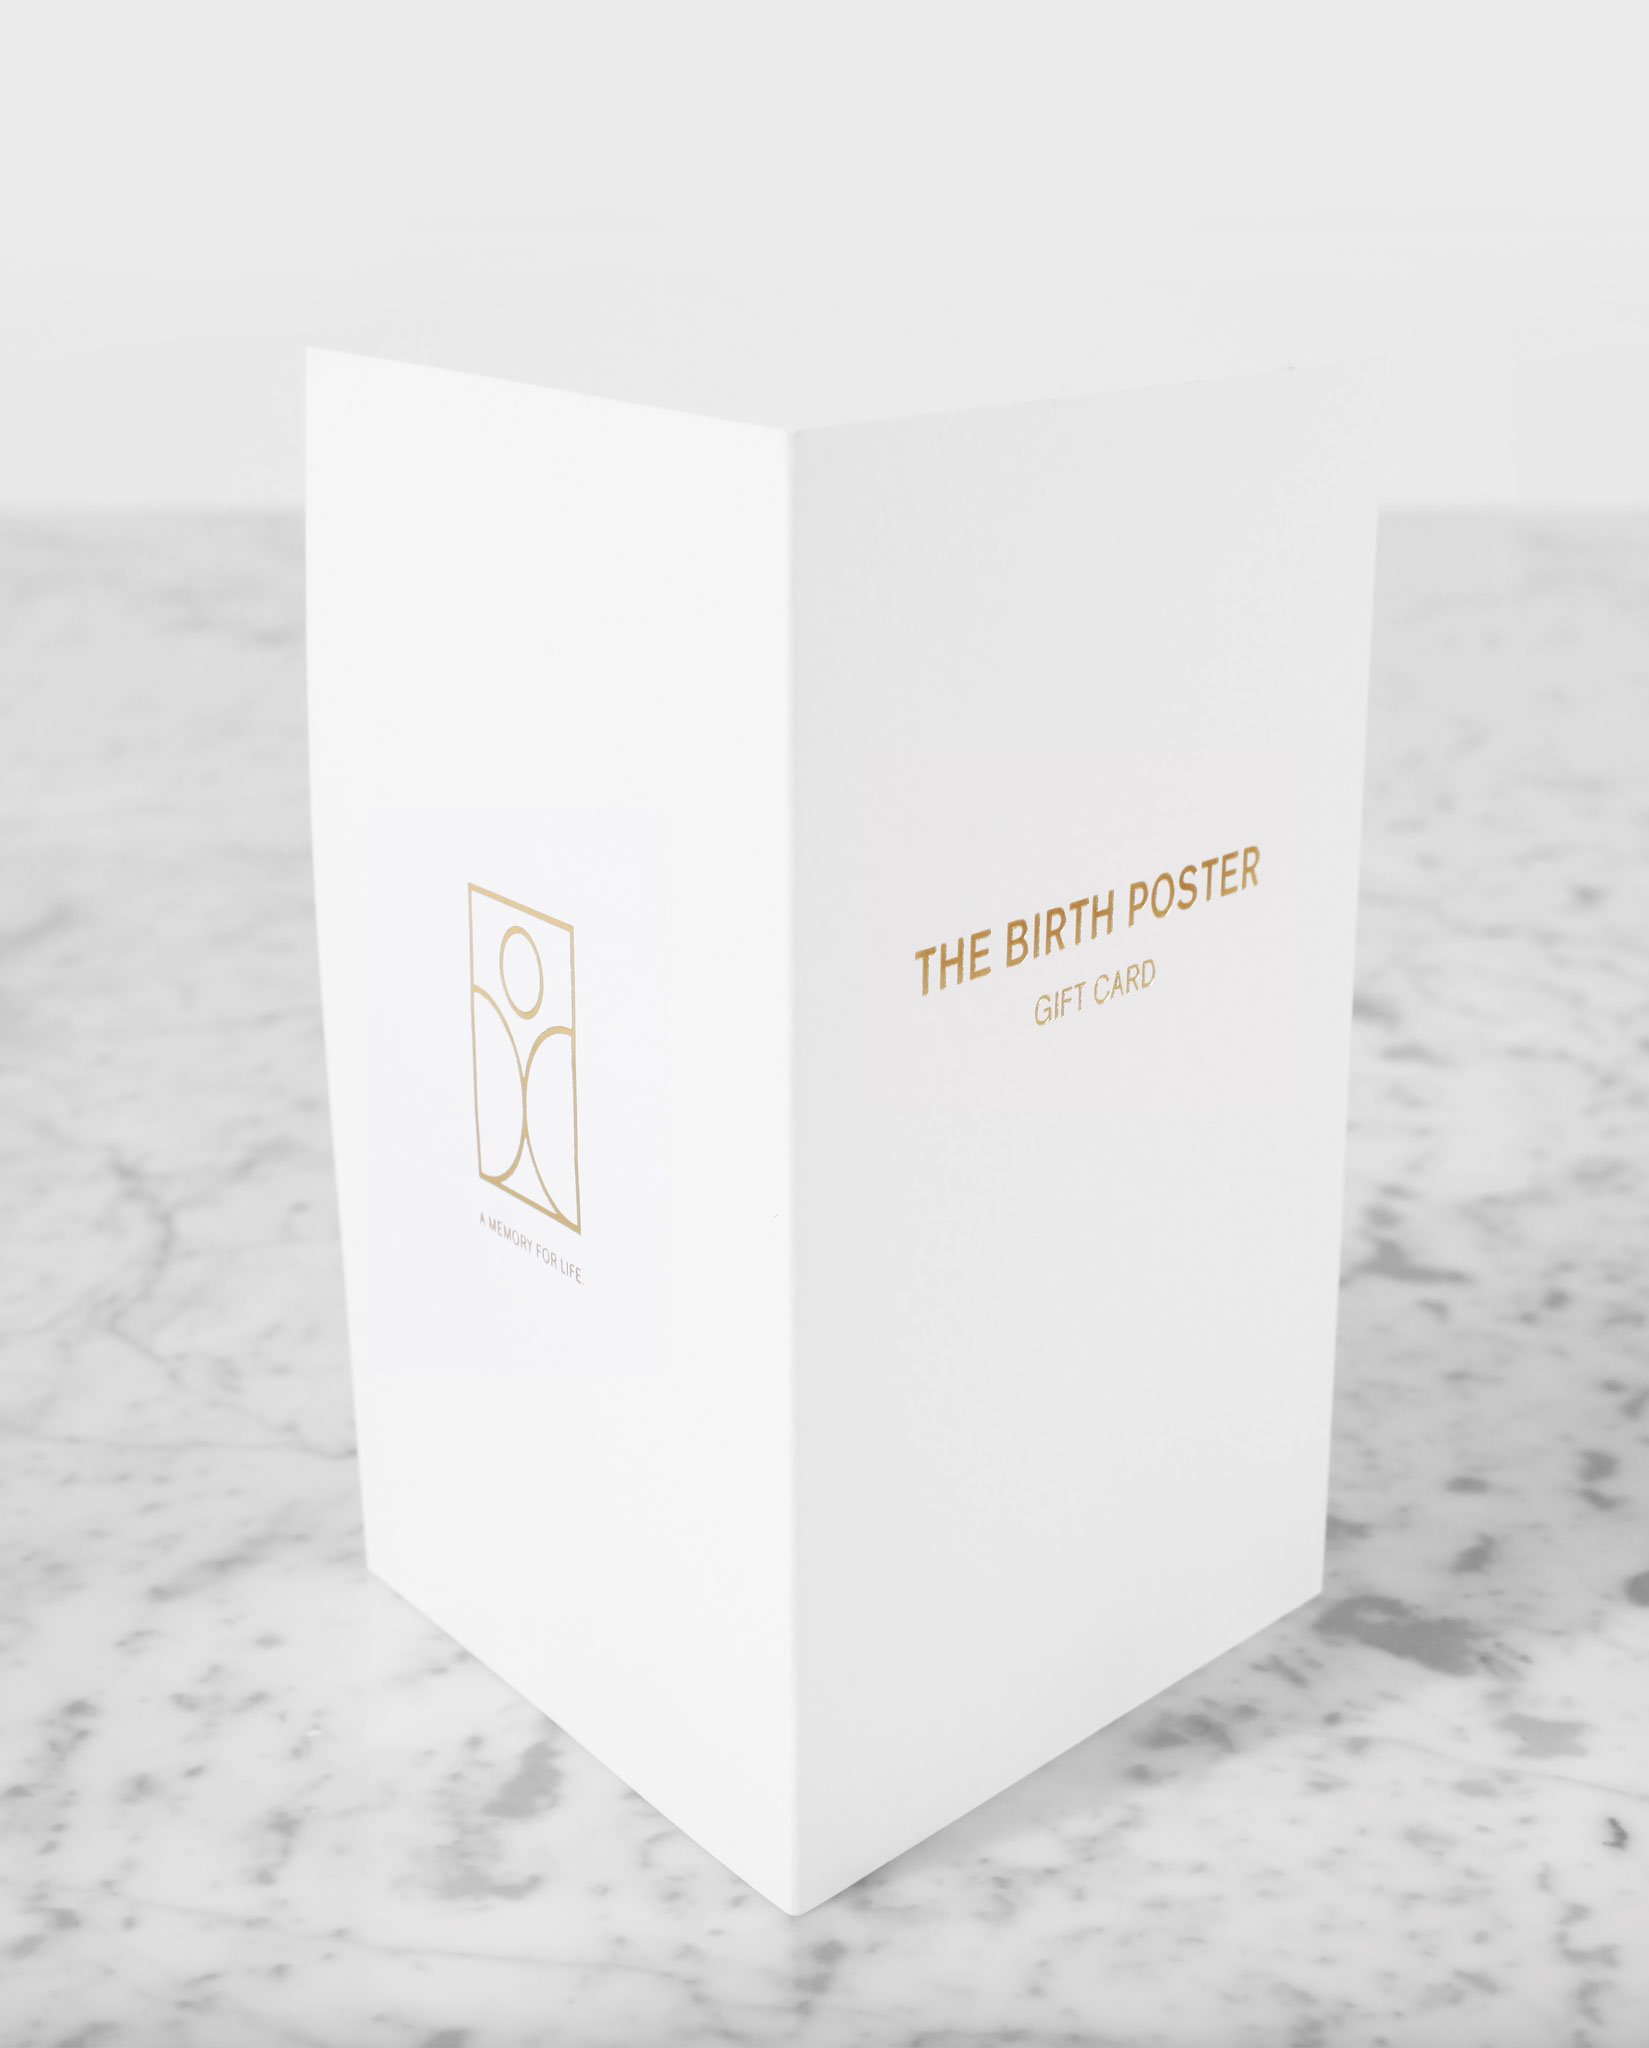 The Birth Poster - Gift card